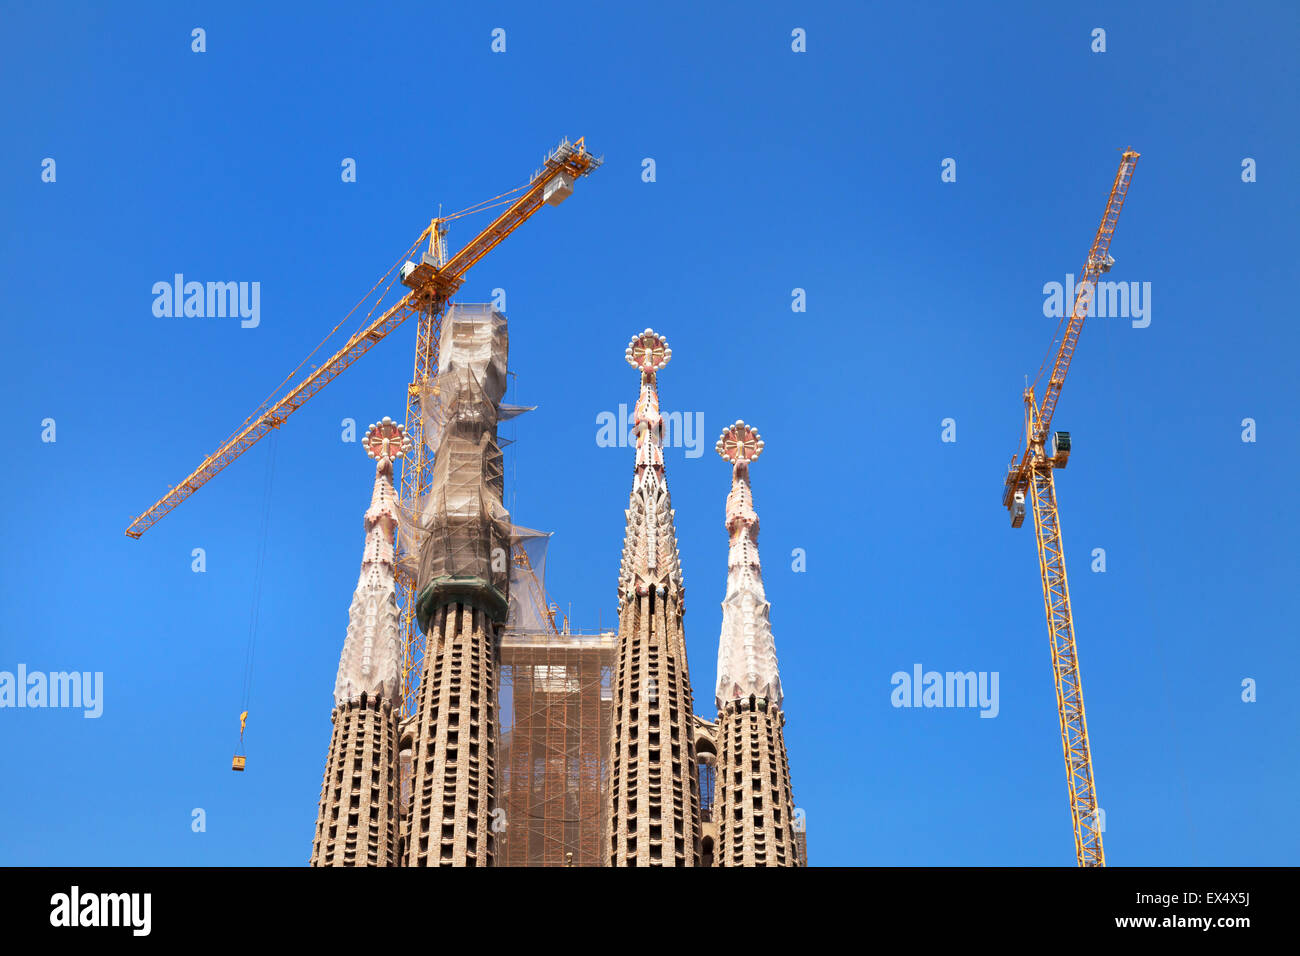 Tops of the towers or steeples, and cranes, Sagrada Familia cathedral designed by Gaudi, Barcelona Spain Europe Stock Photo